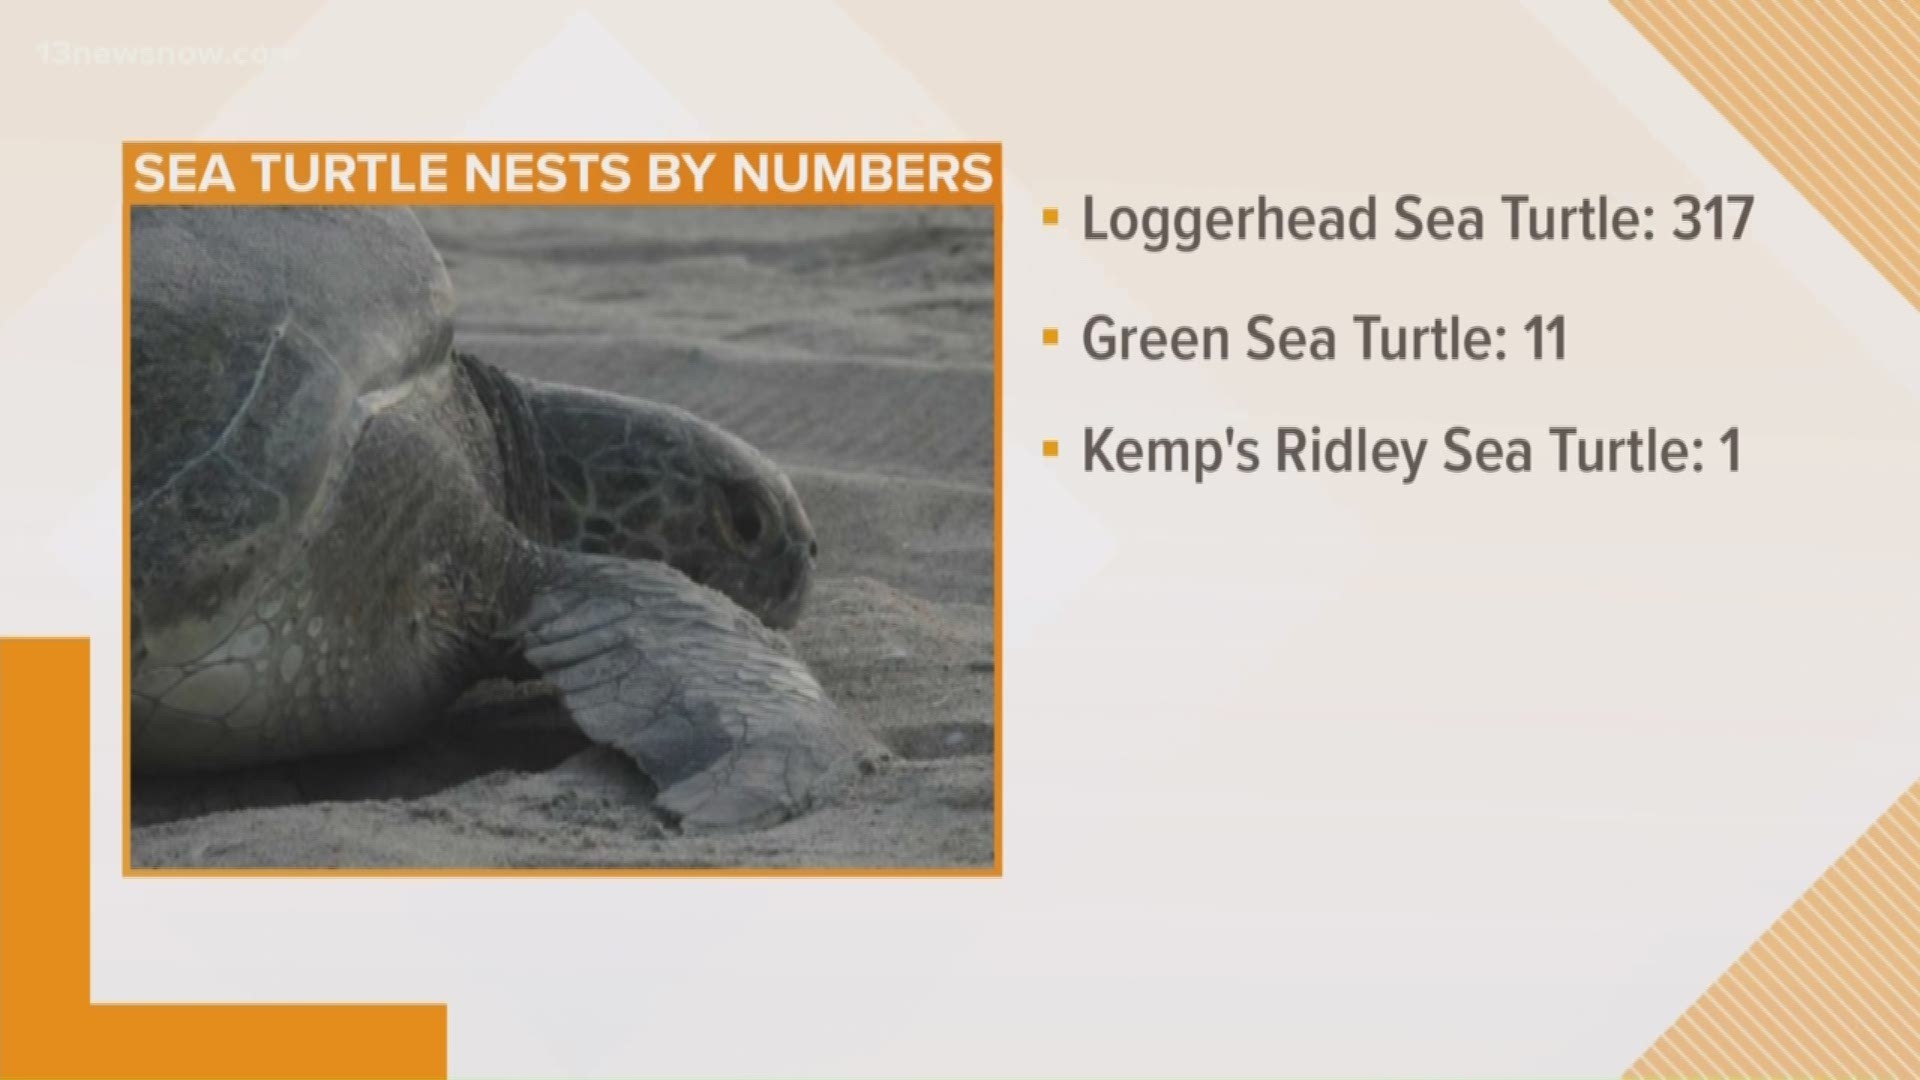 So far in 2019,  326 sea turtle nests have been found at Cape Hatteras National Seashore.